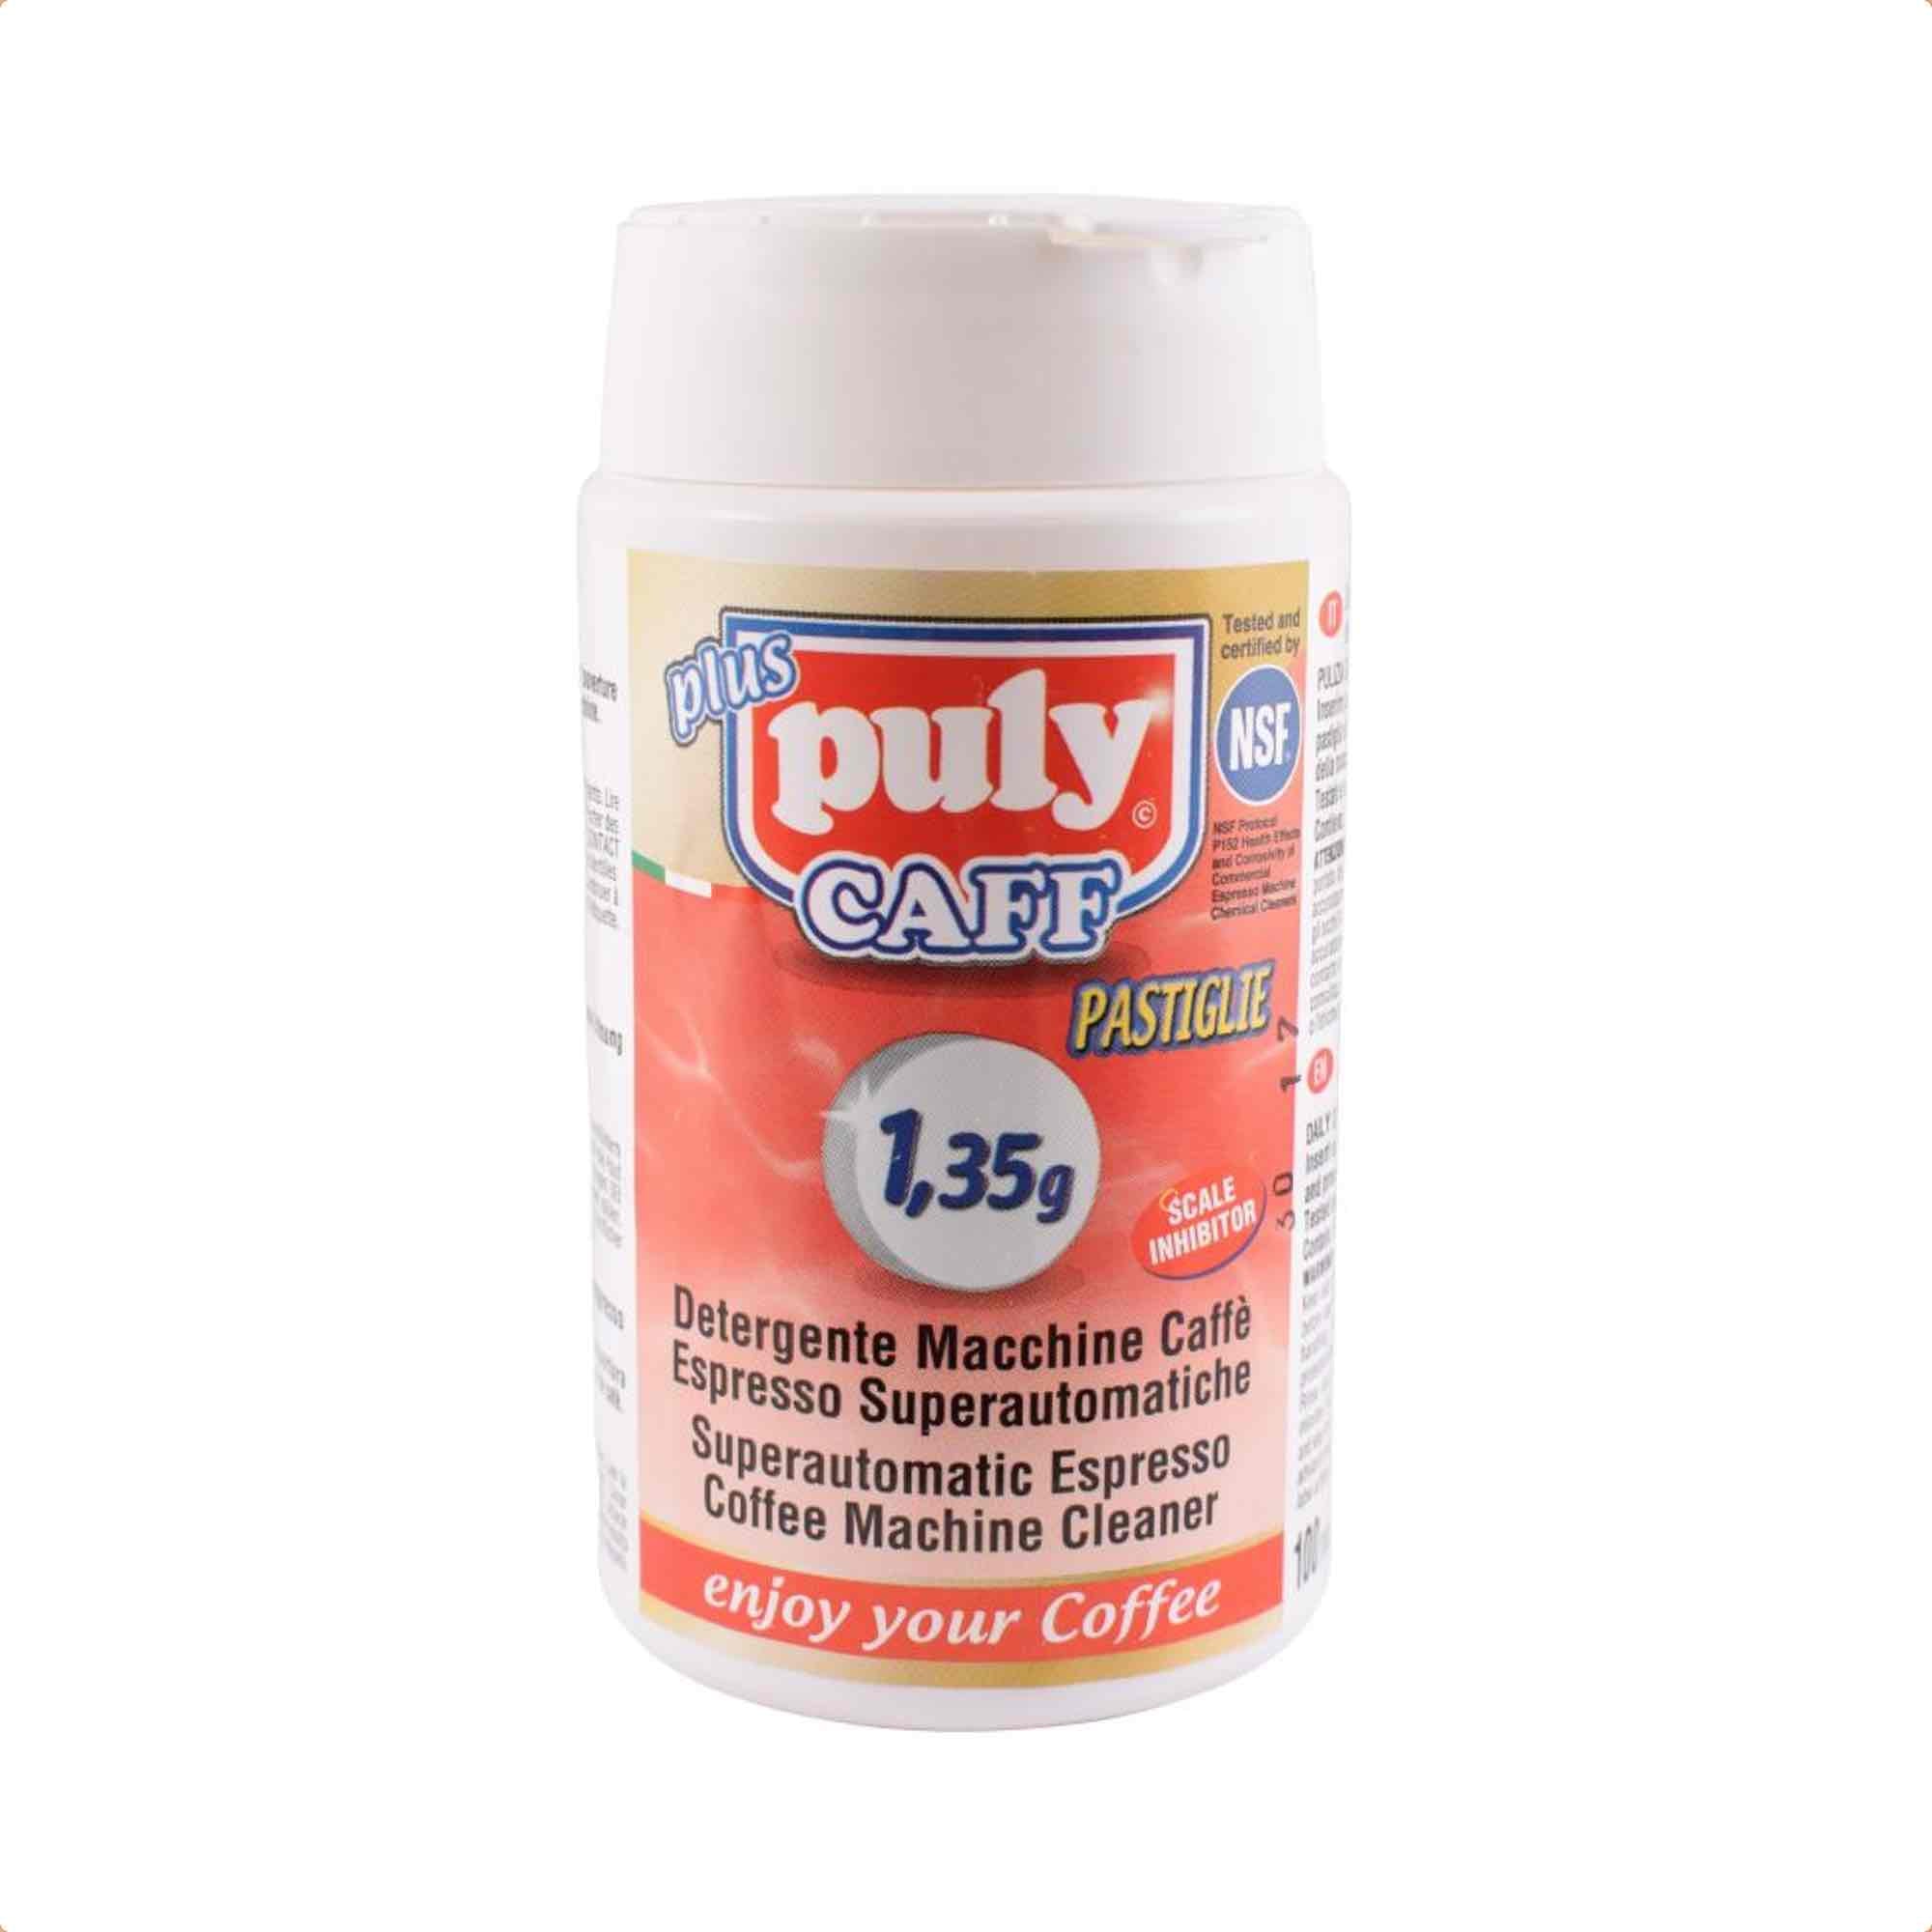 Puly Caff Coffee Espresso Machine Cleaning Tablets Tub of 100 - 1.35g